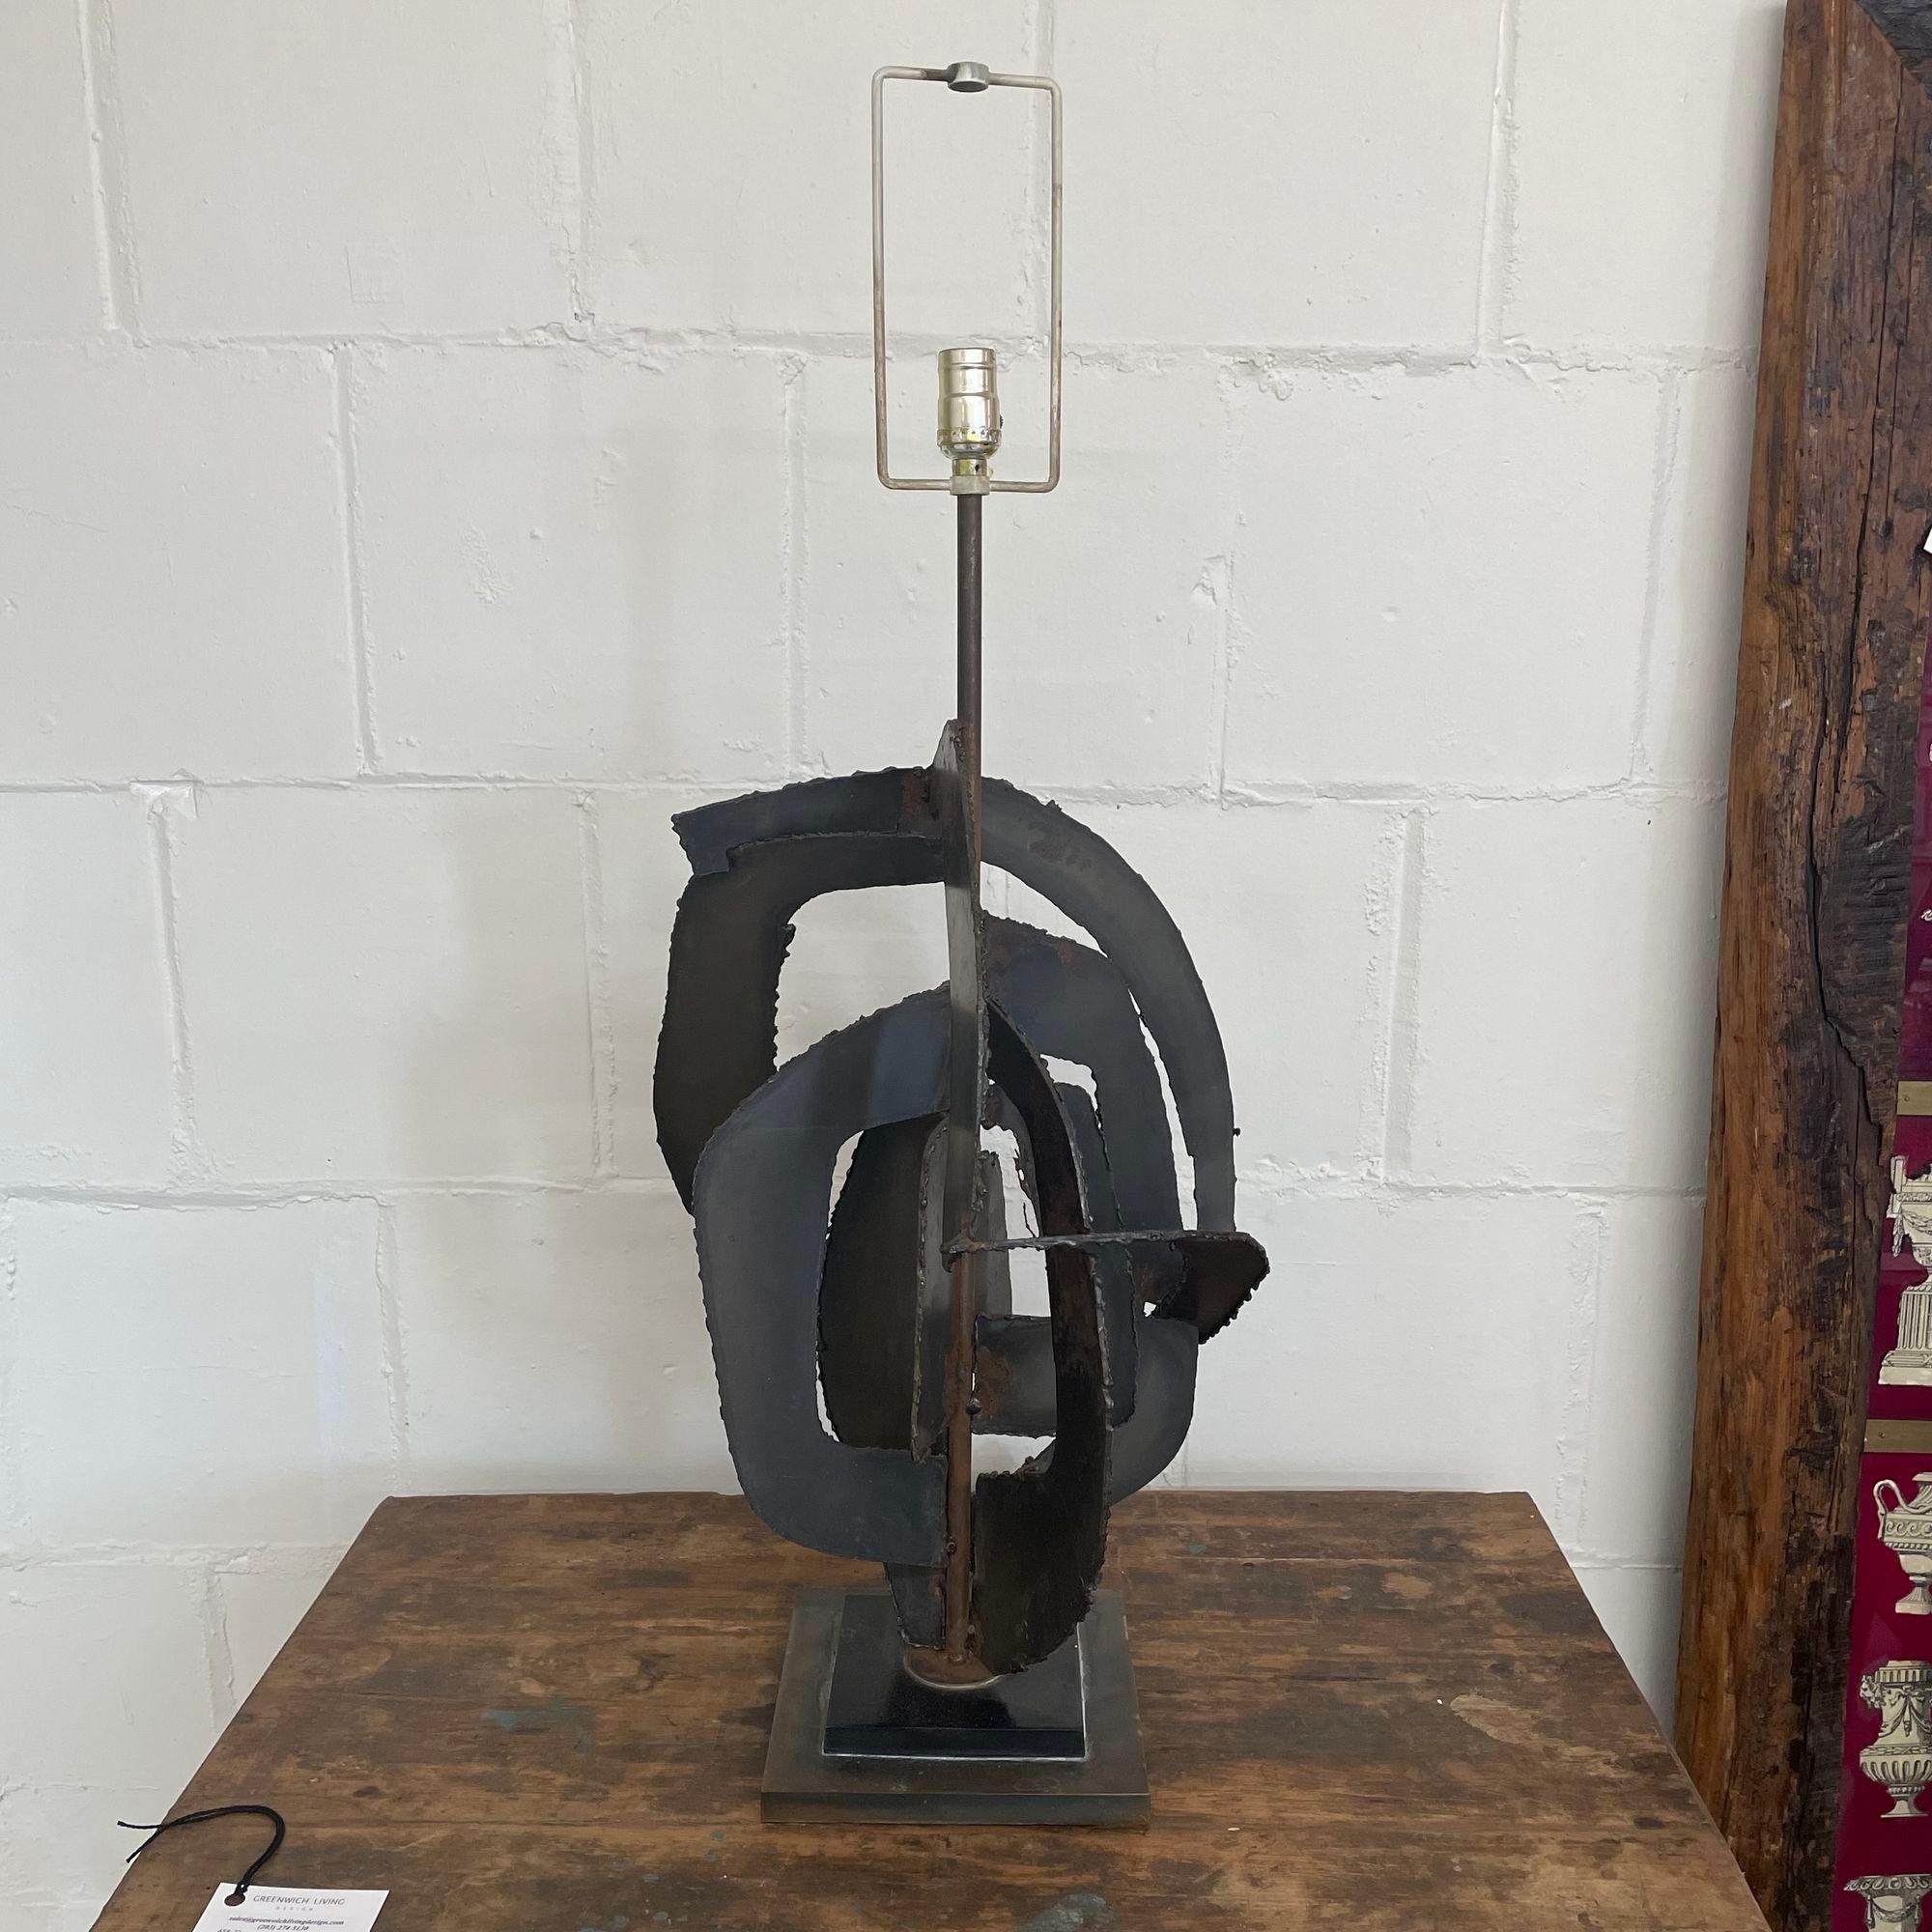 Brutalist Mid Century Modern Table Lamp, Blackened Steel, One Available

One of a pair having fine brutalist welded construction new wired without shade. Unmarked Richard Barr Brutalist lamps for Laurel

38 H x 15 Diameter

1 x standard e26 socket